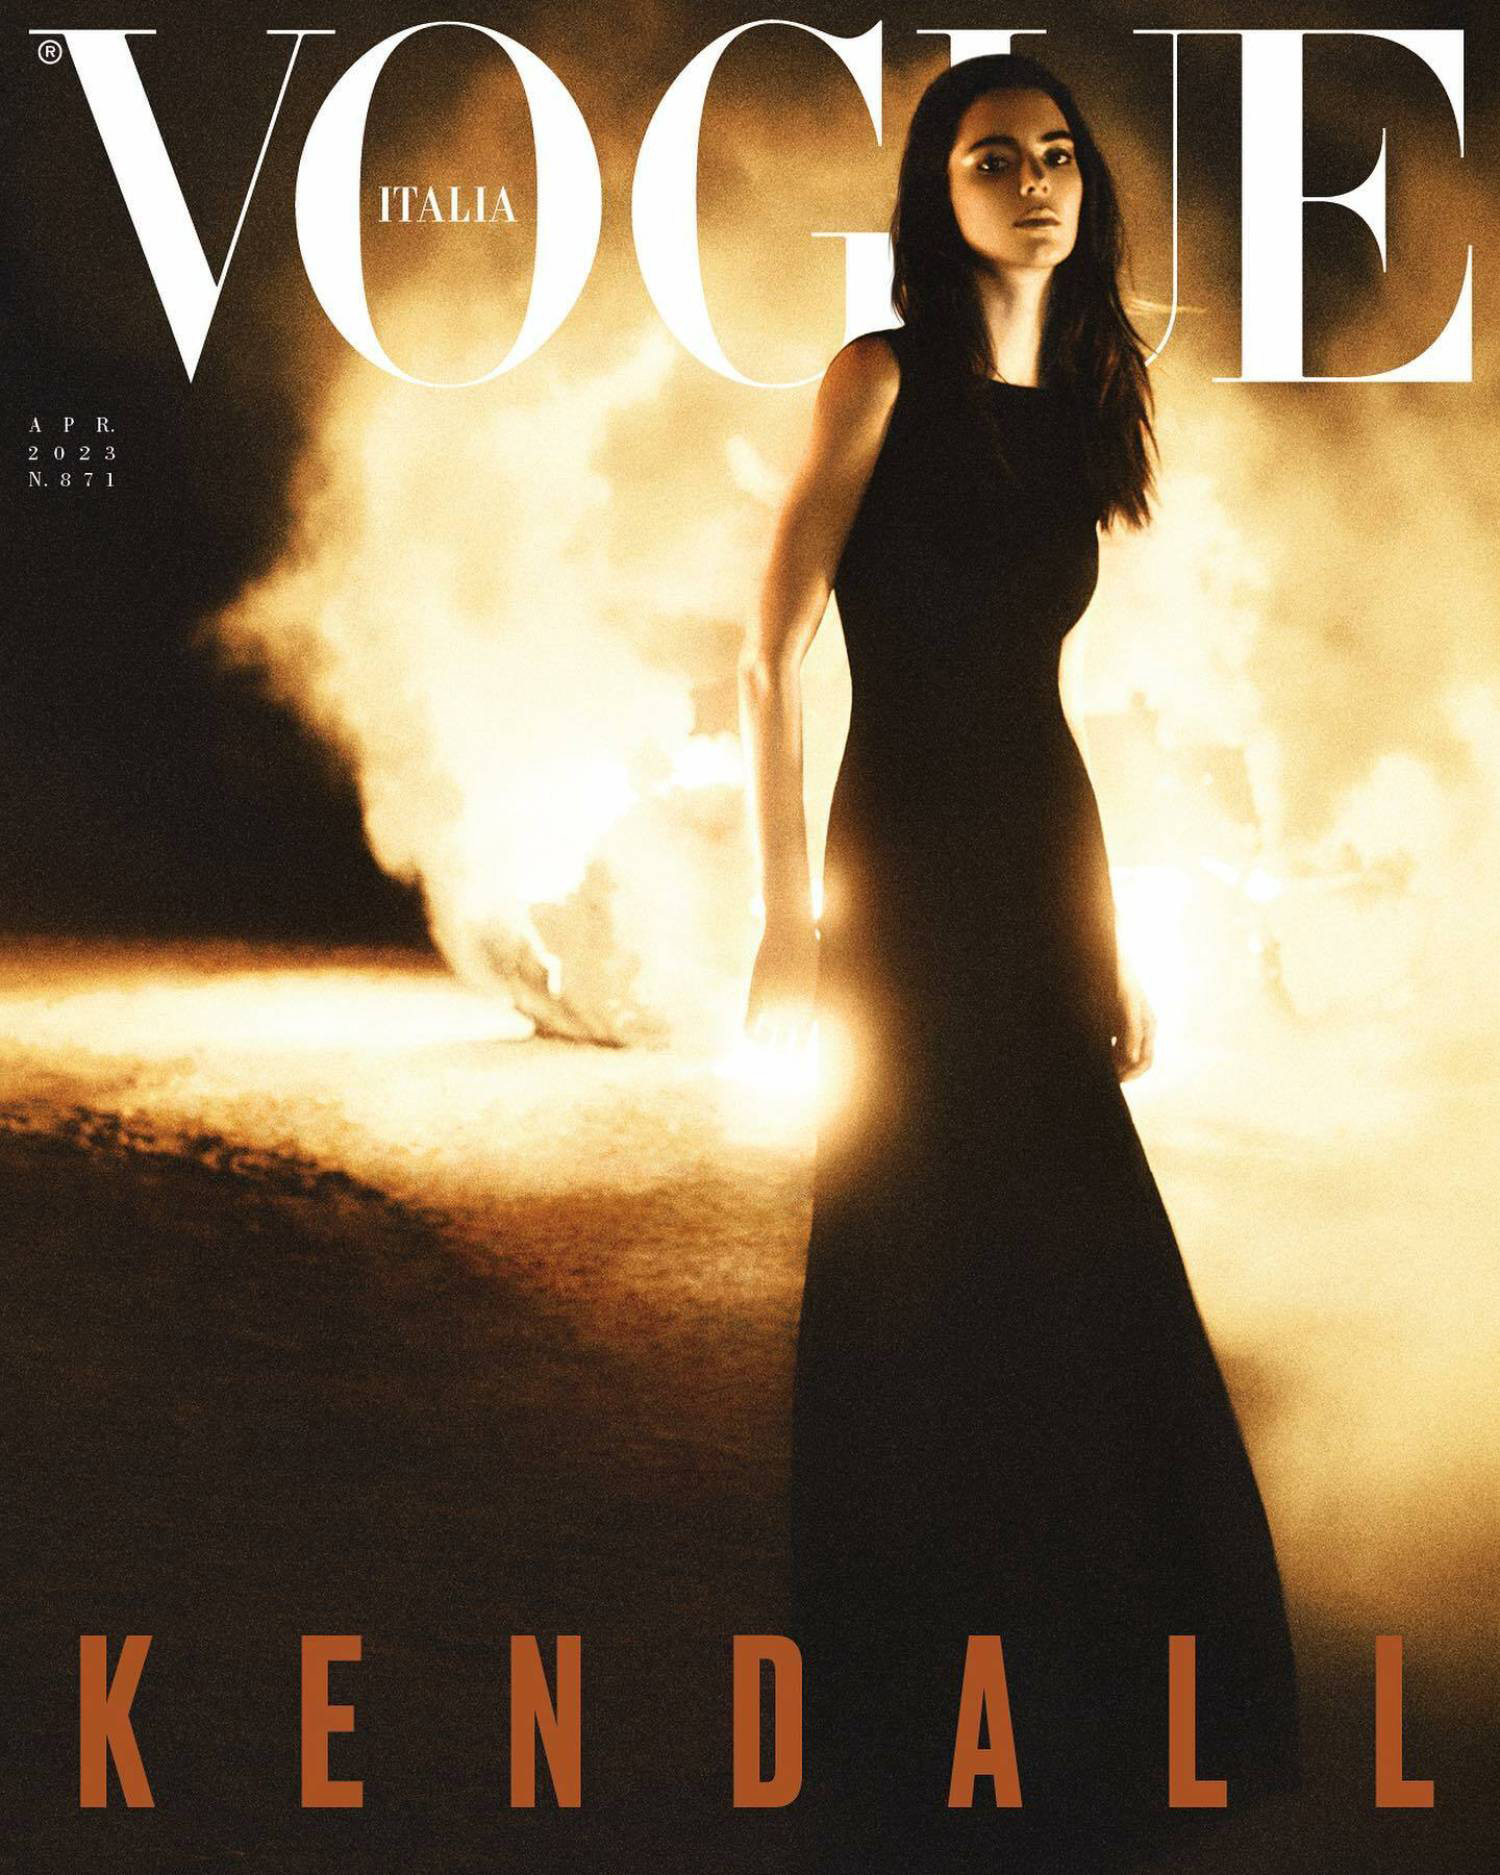 Kendall Jenner covers Vogue Italia April 2023 by Robin Galiegue